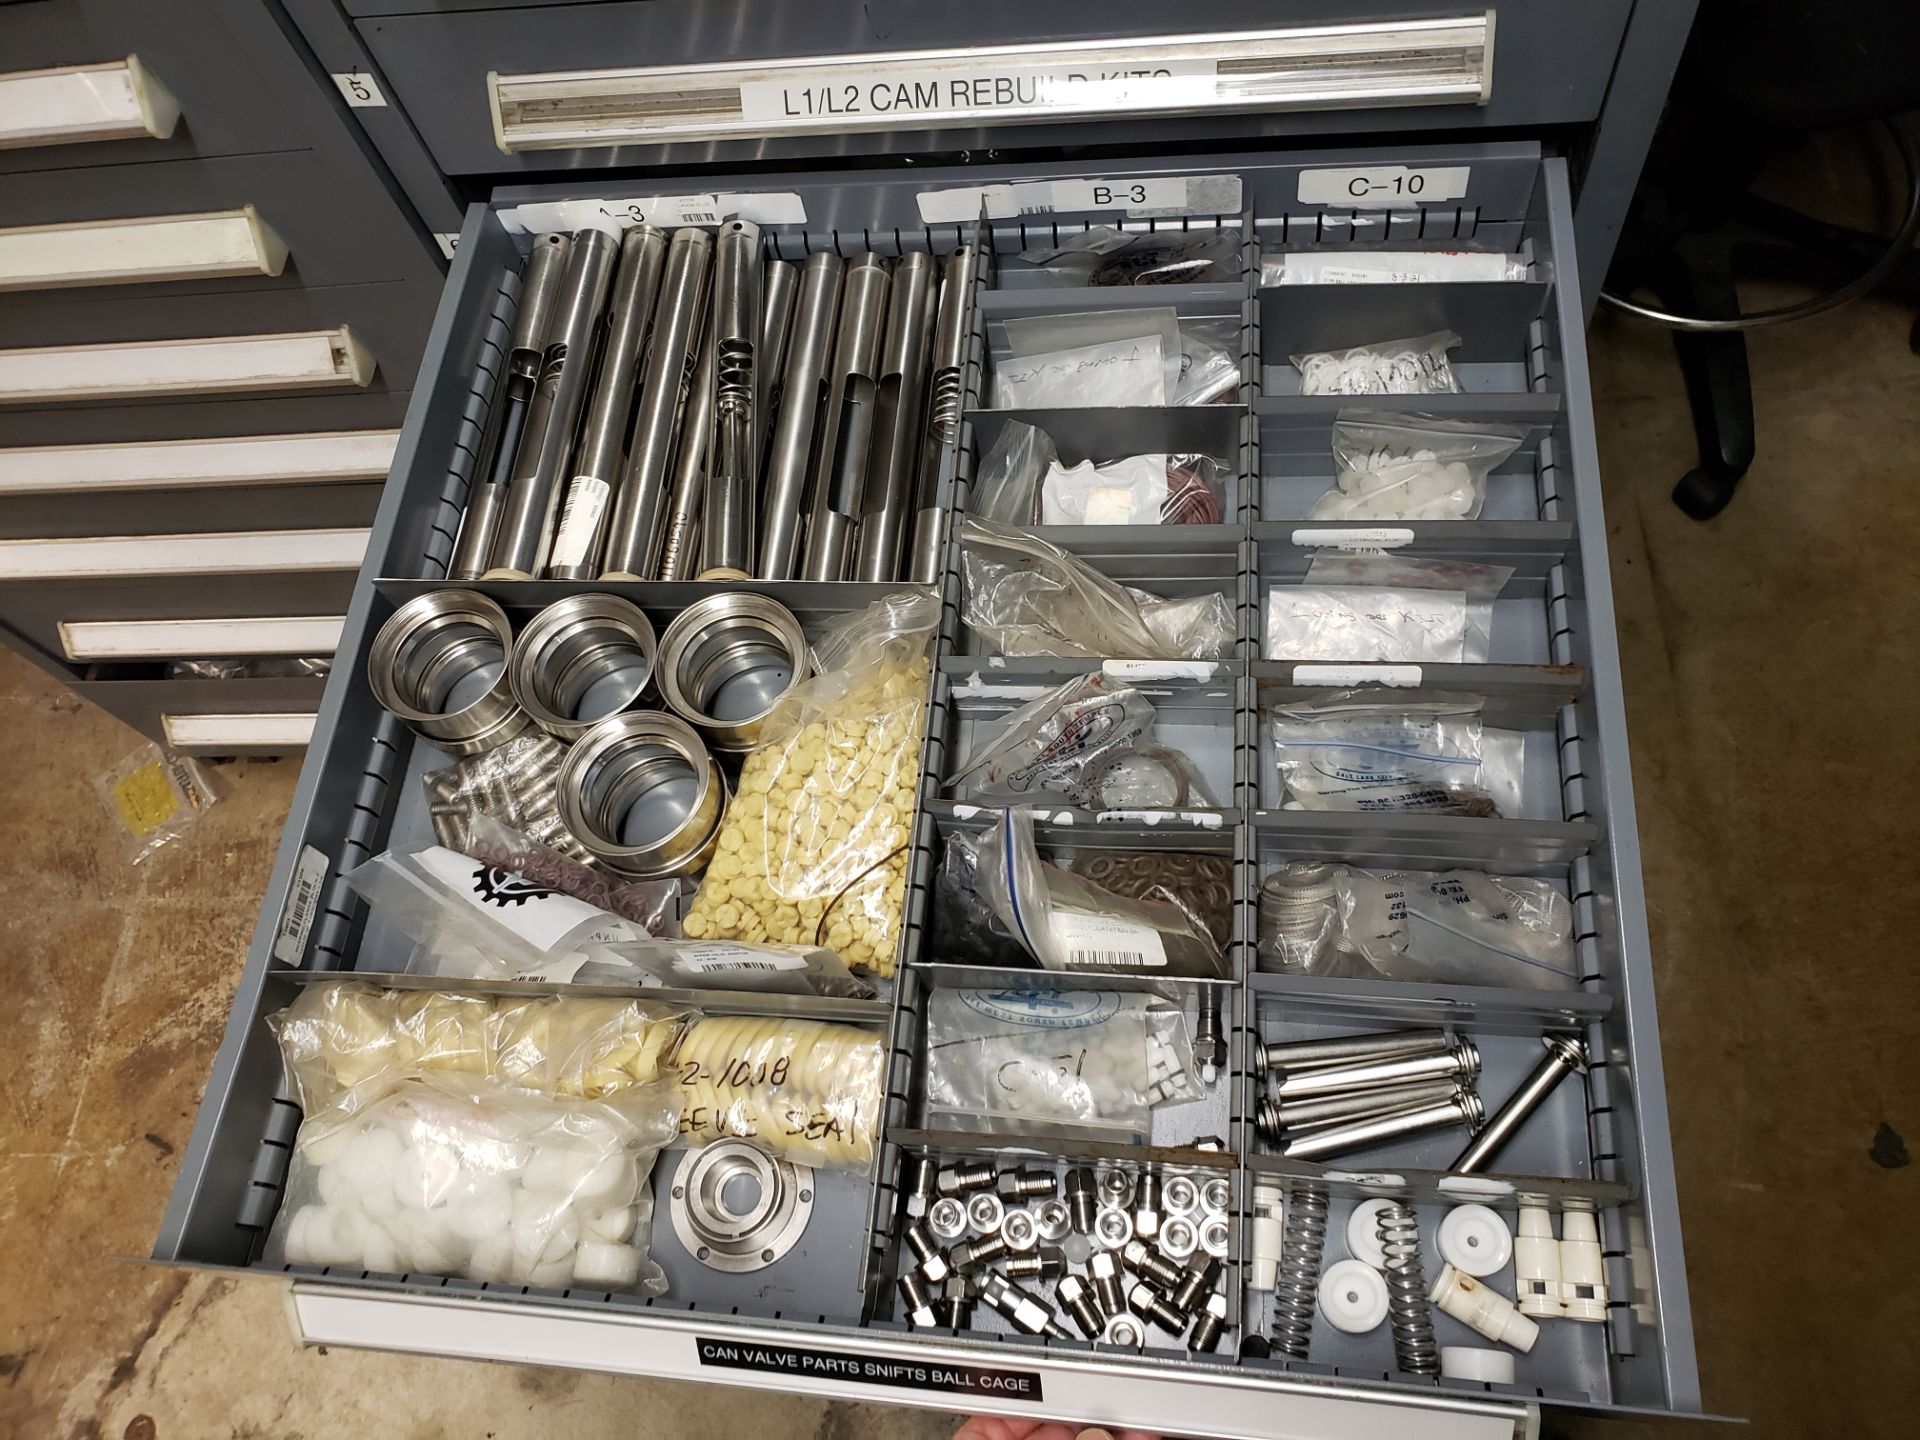 Vidmar 10 Drawer Storage Cabinet, W/ Contents, Bevcorp Filler Nozzle Spare Parts | Rig Fee: $100 - Image 7 of 11